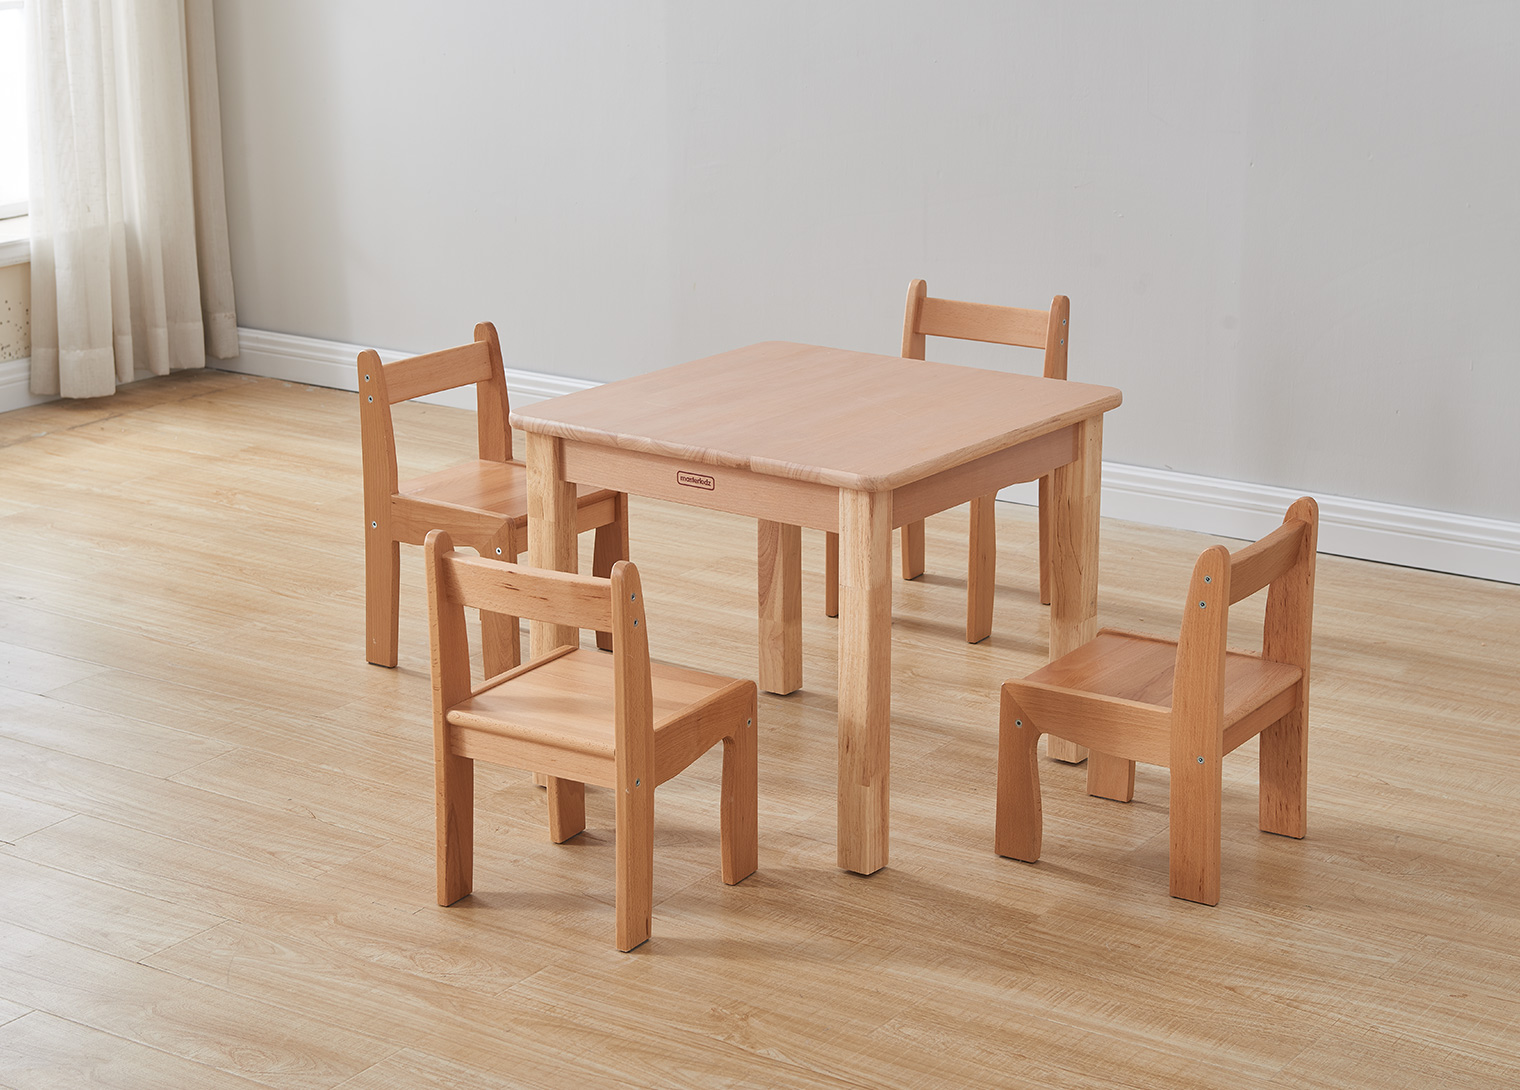 Forest School - 455H Square Table